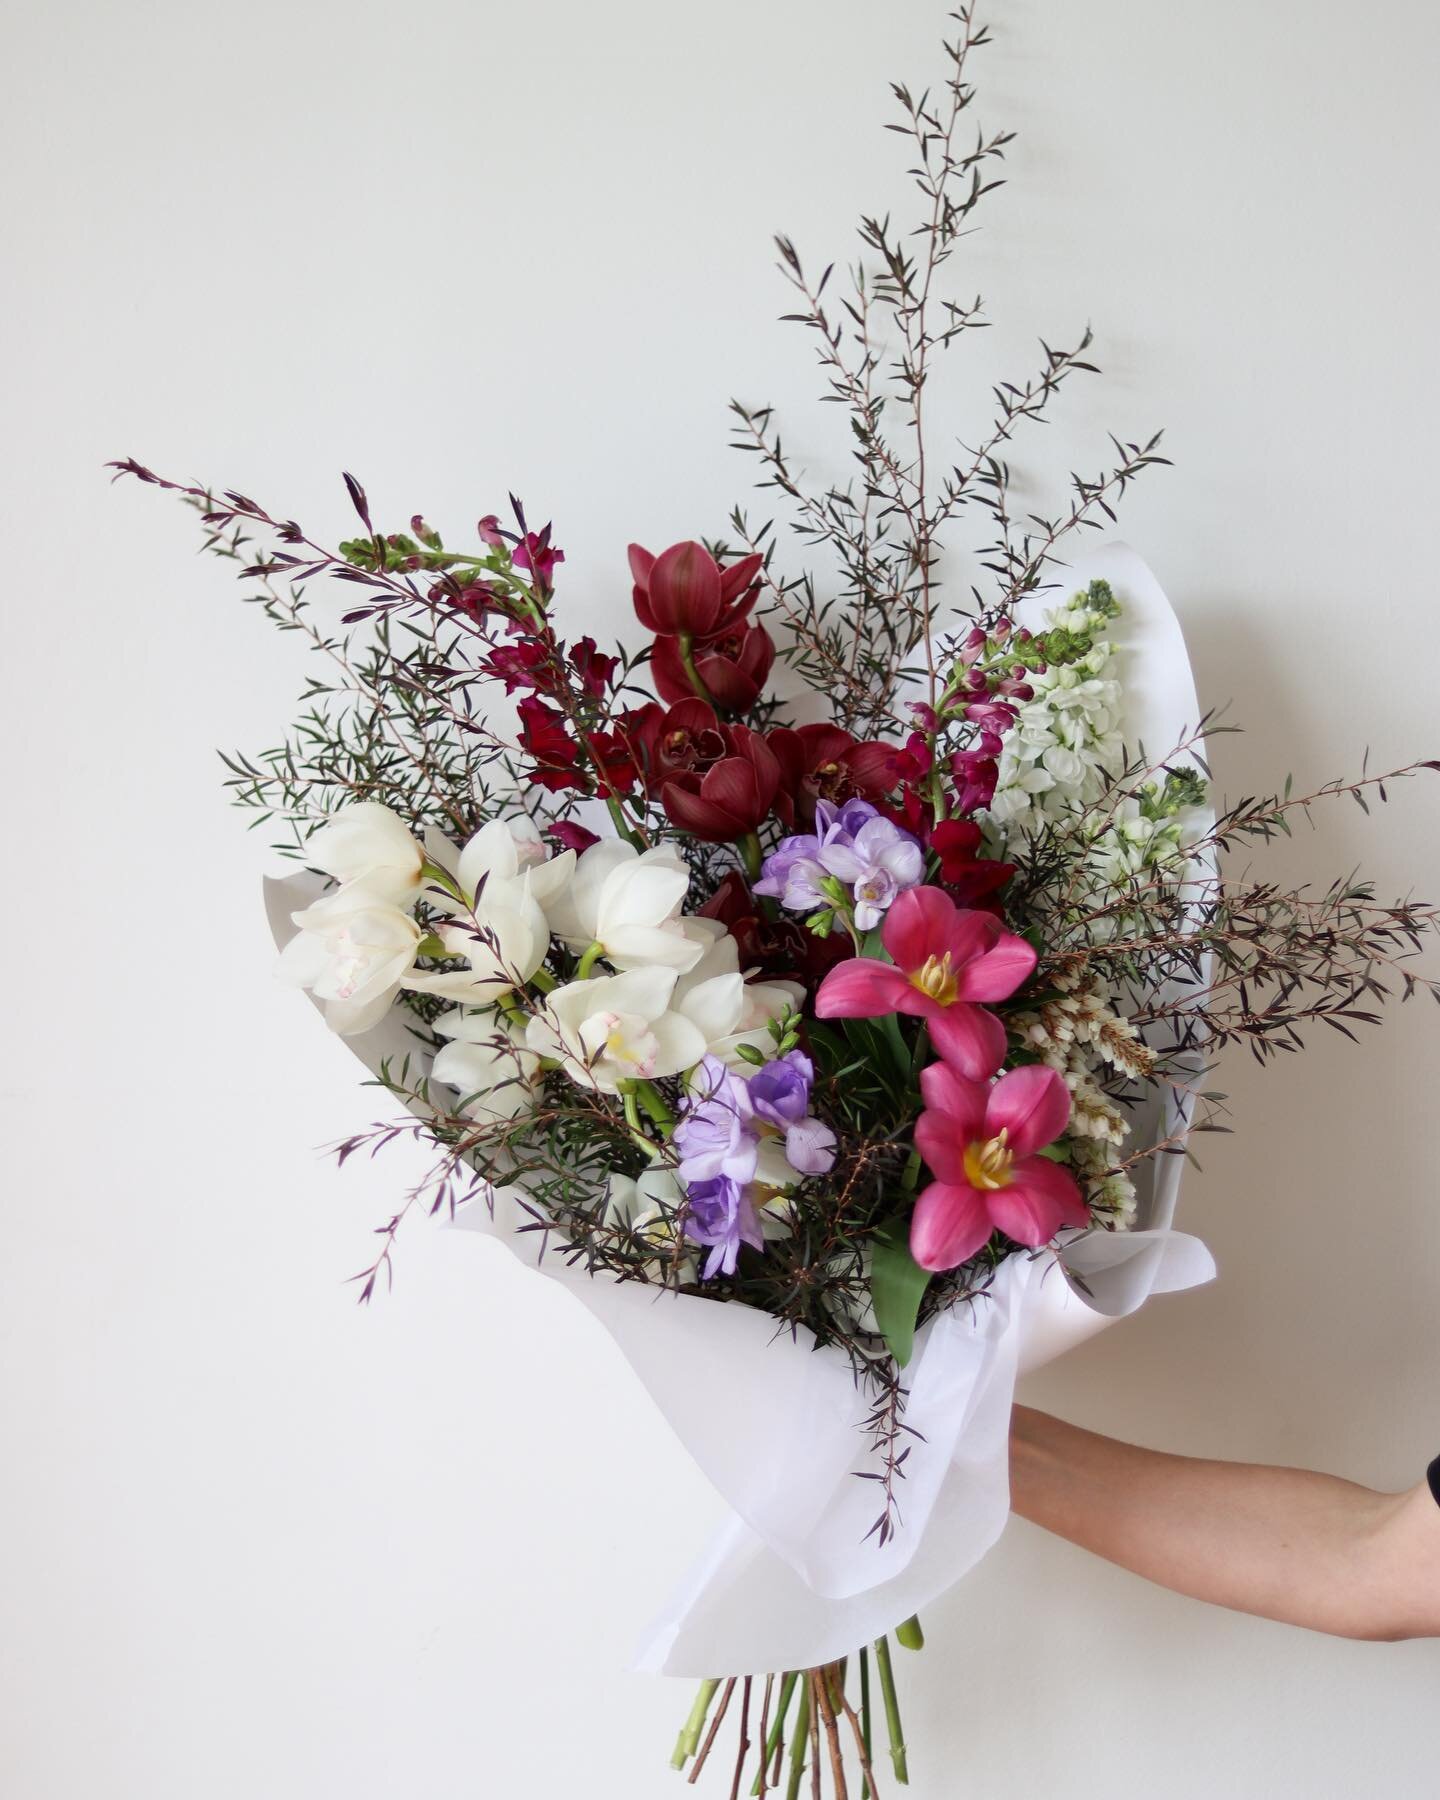 &hearts;️VALENTINES DAY&hearts;️ 
A little late to the party but we will be making nice bunches up to deliver this Tuesday the 14th! Seasonal bunches only, link in bio to order x

#nelsonnz #nelsonfloristnz #floristnelson #valentinesday #ordernow #fl